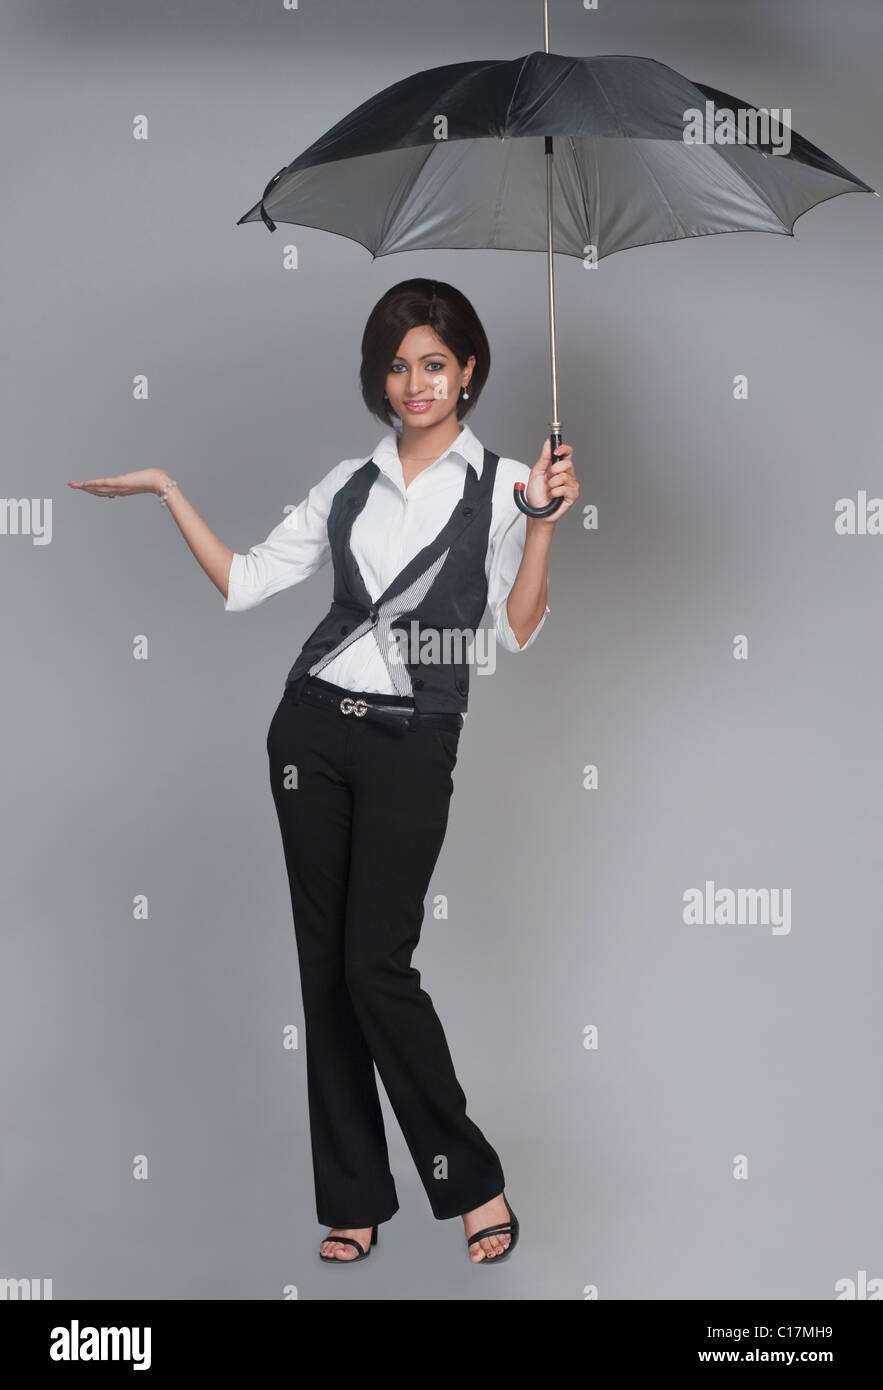 Businesswoman posing with an umbrella and smiling Stock Photo